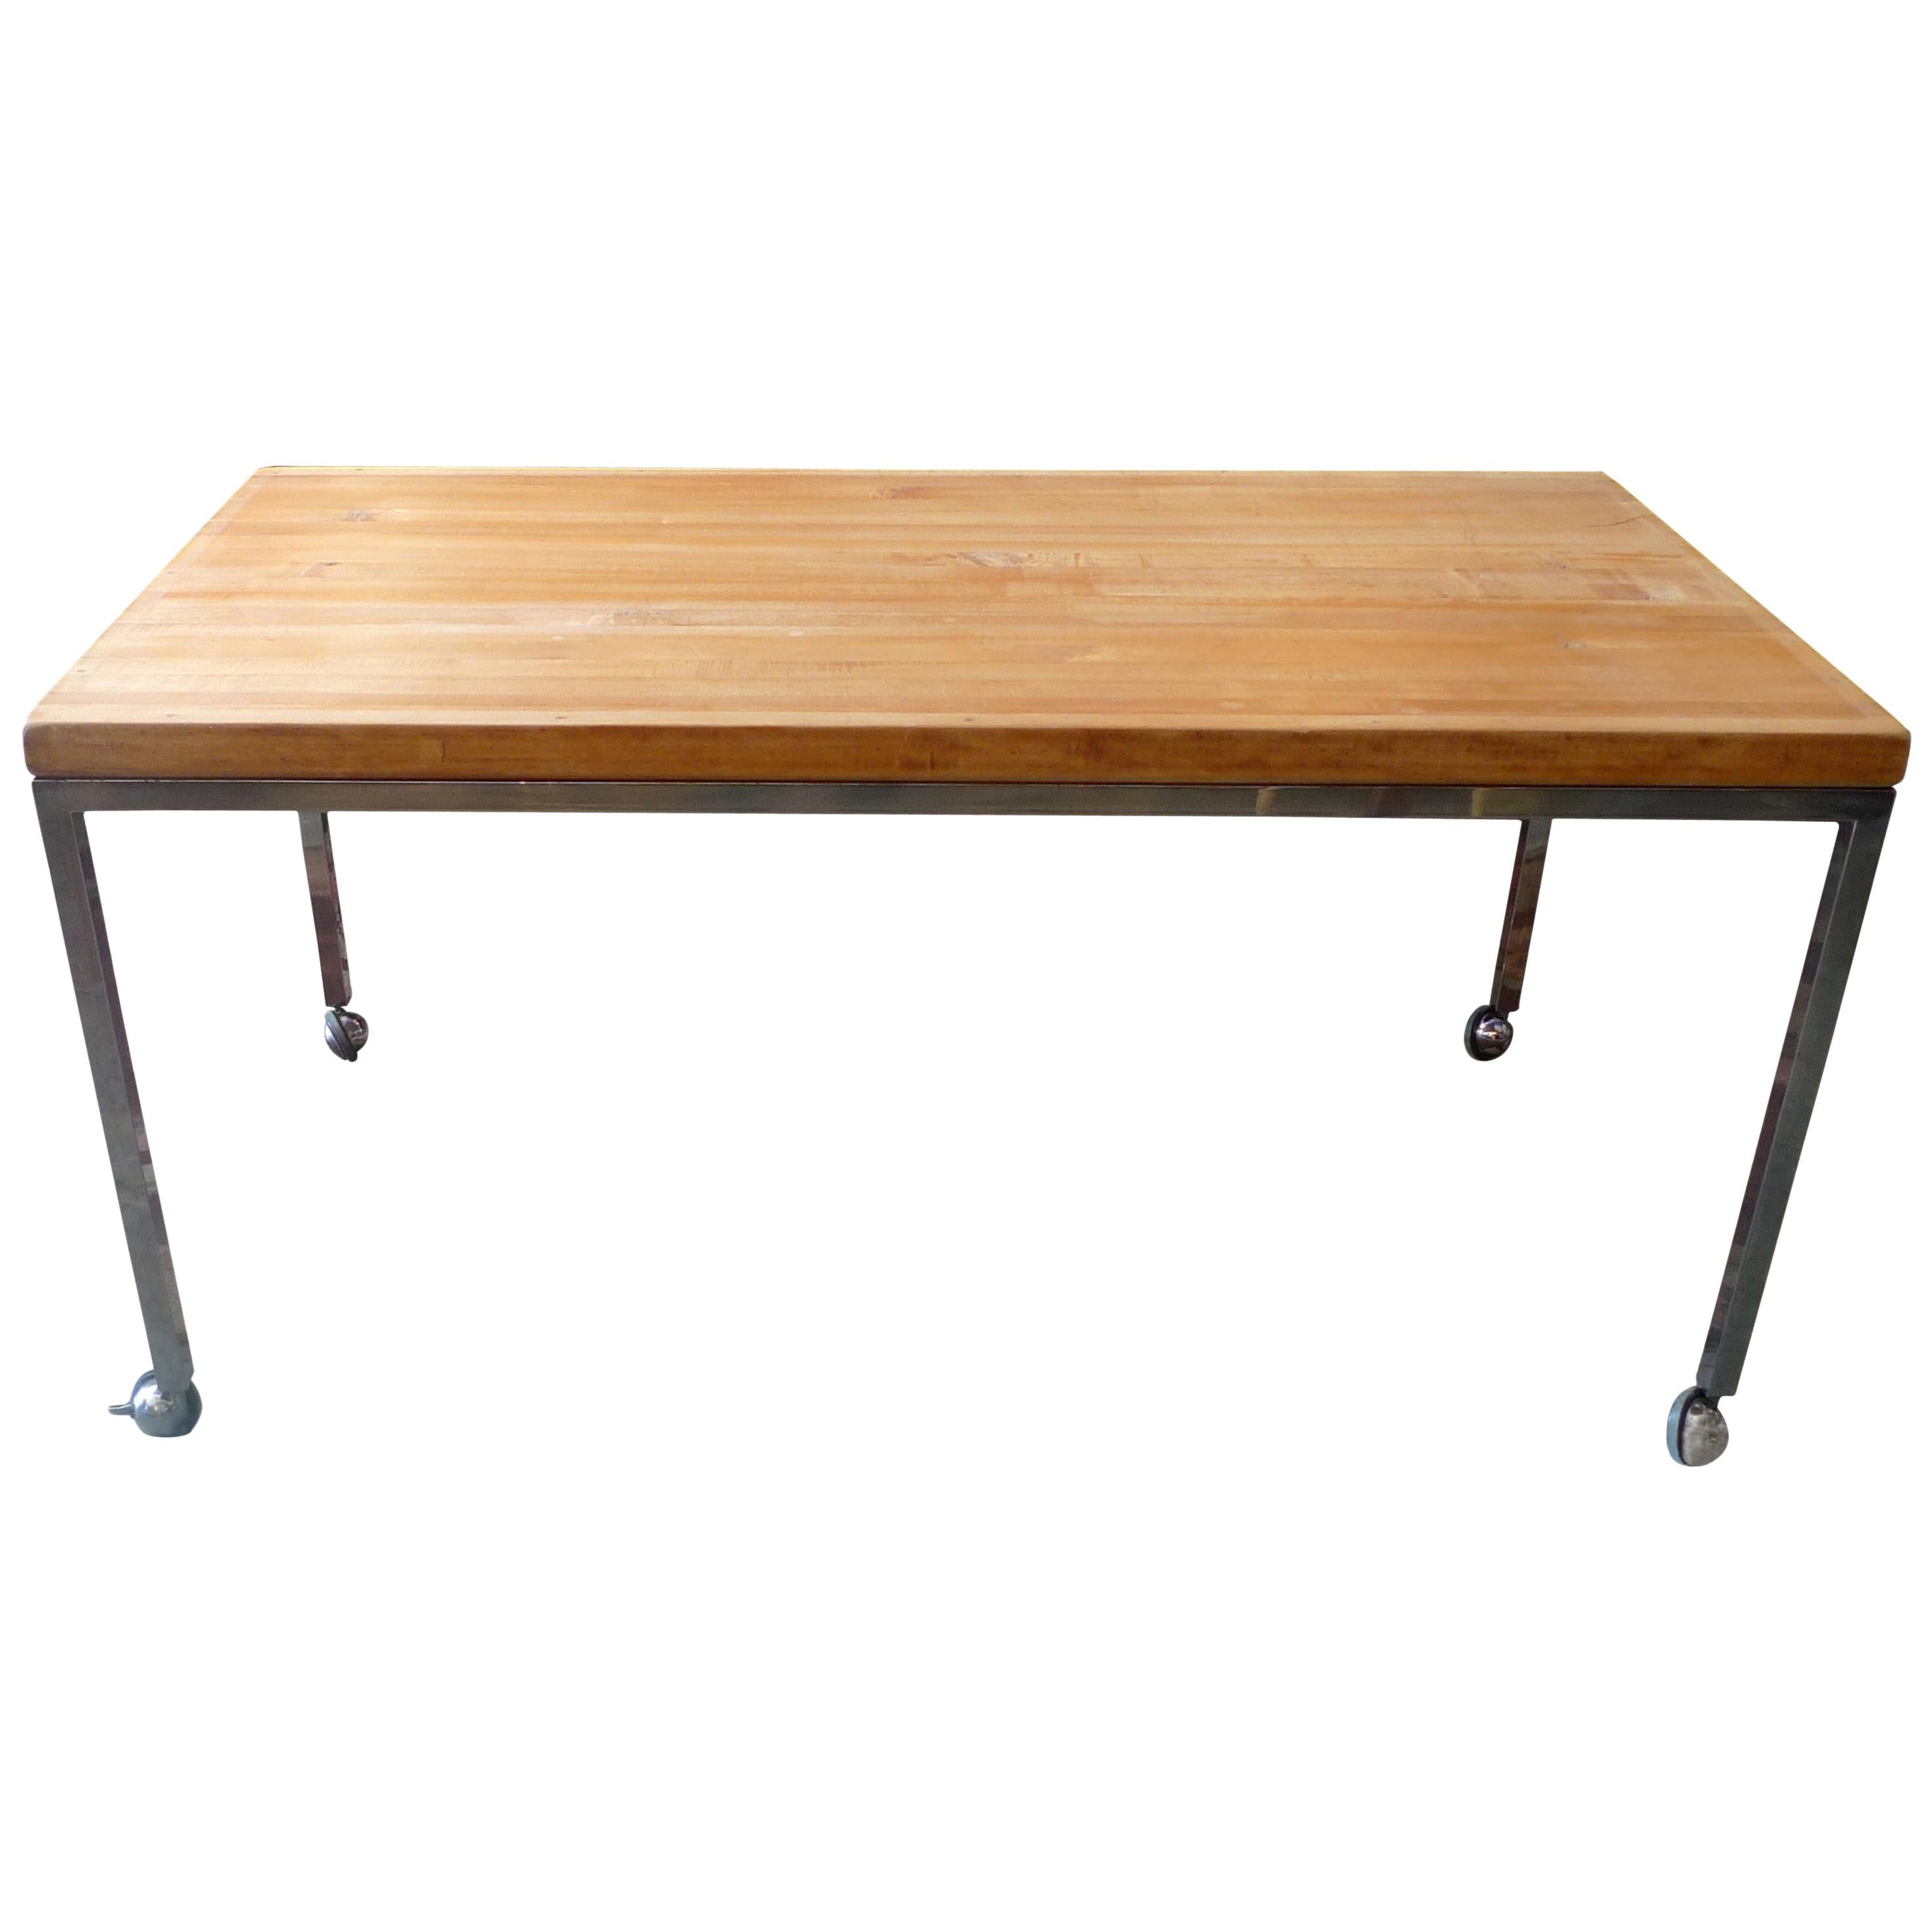 American 1970s Butcher's Block Kitchen Table on Polished Chrome Legs and Wheels